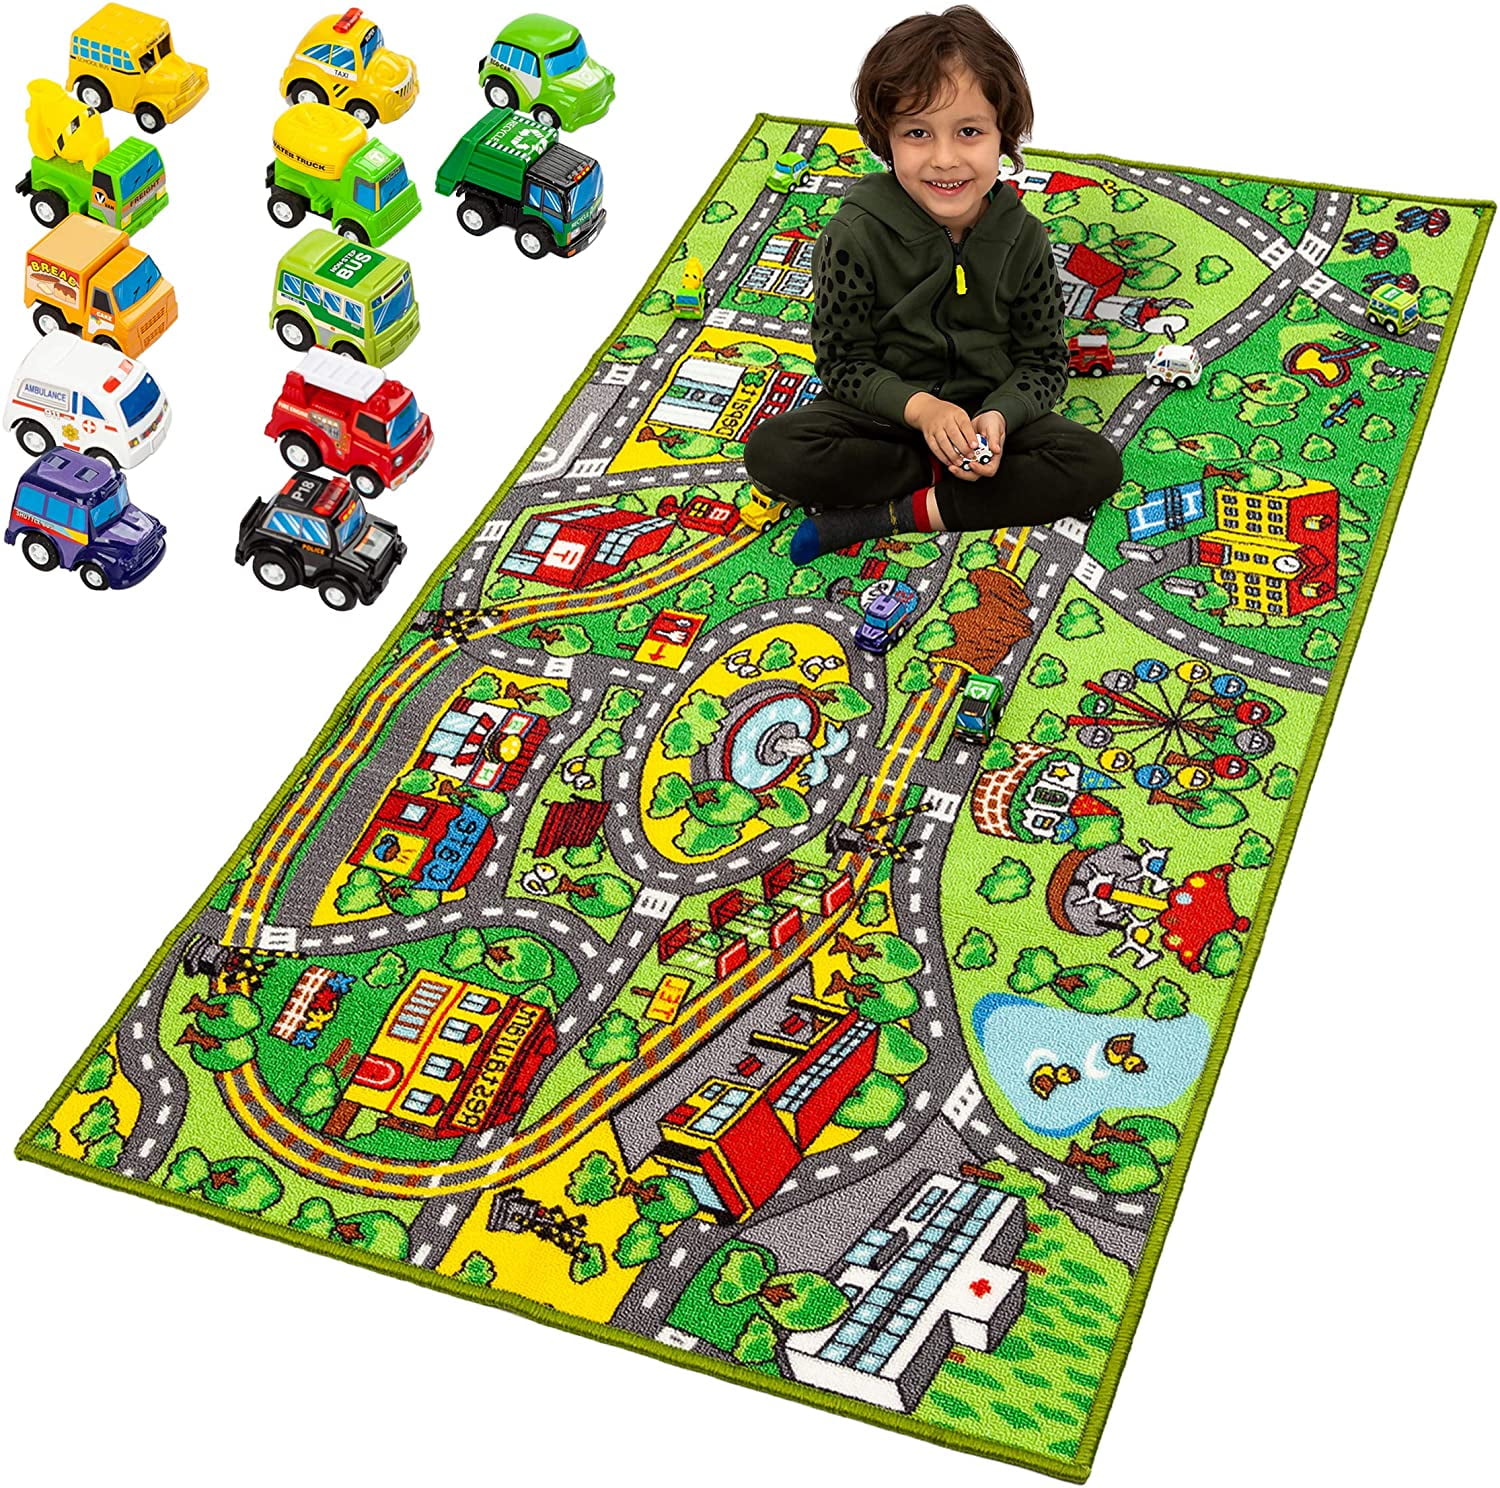 Softlife Kids Carpet Play Mat Rug Large 48 x 72 City Life Great for Playing with Cars and Toys Children Area Rugs for Bedroom Playroom Nursery 